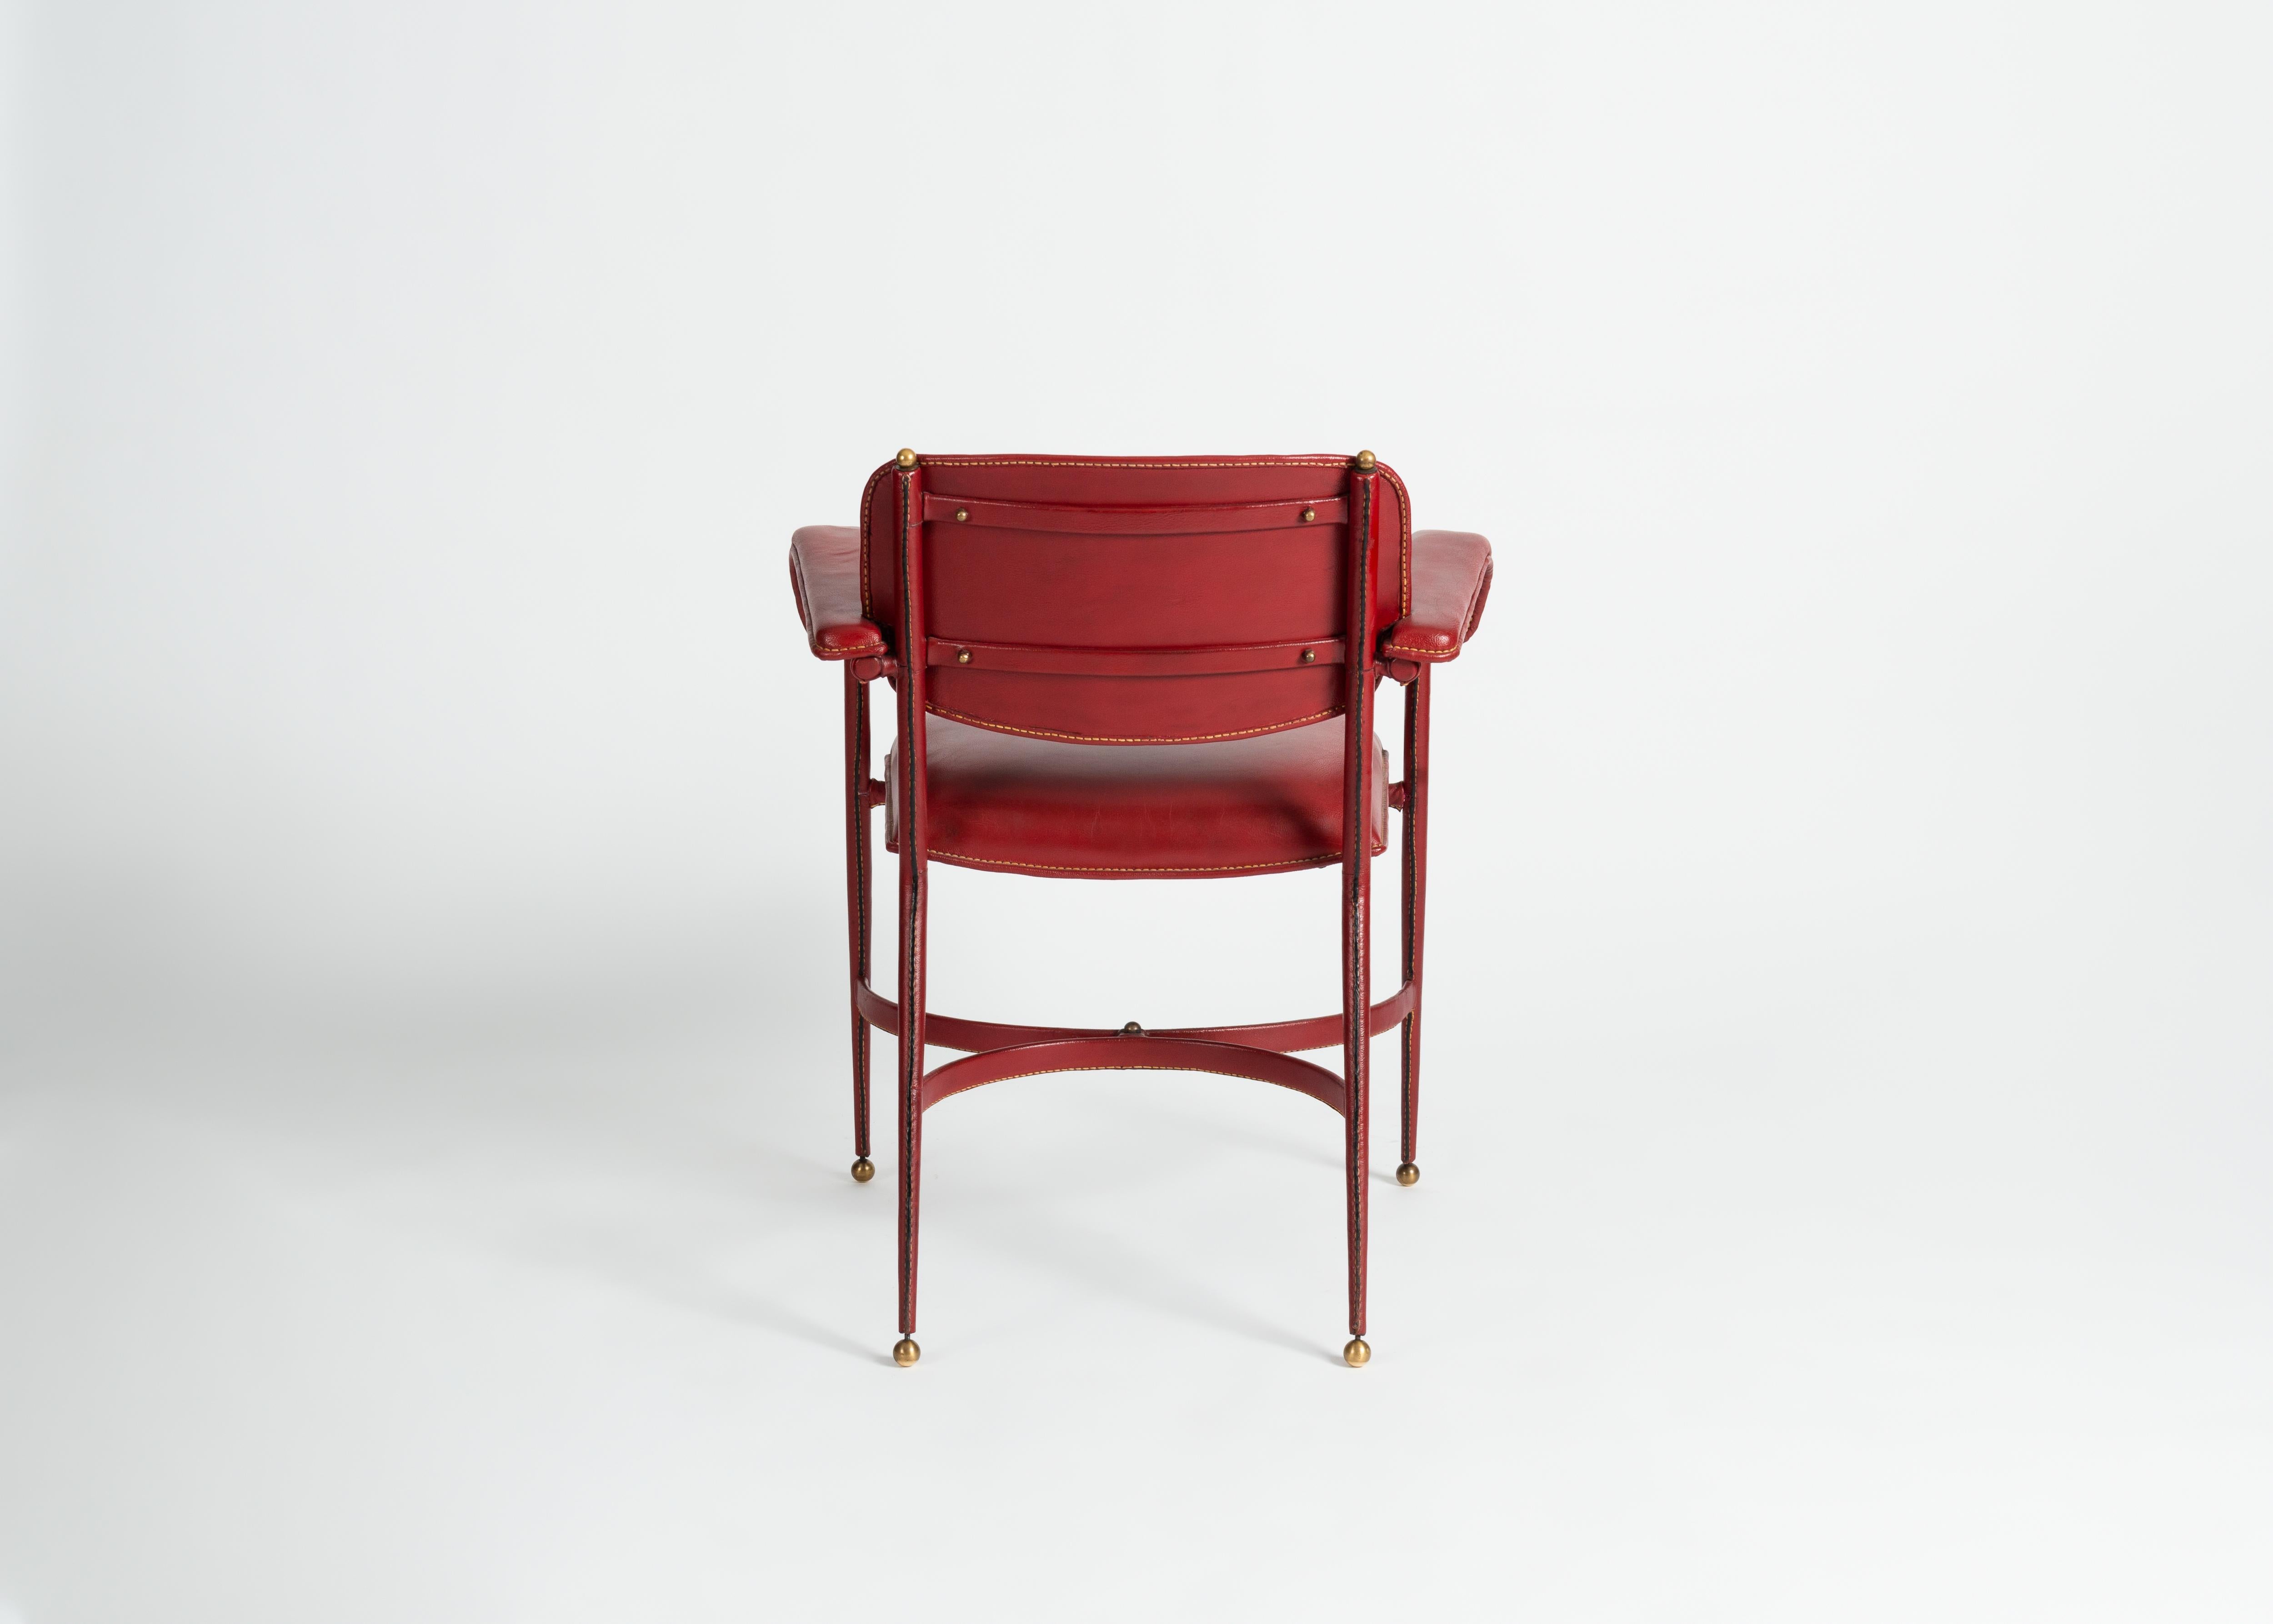 Mid-20th Century Attributed to Jacques Adnet, Red Leather Armchair, France, circa 1950